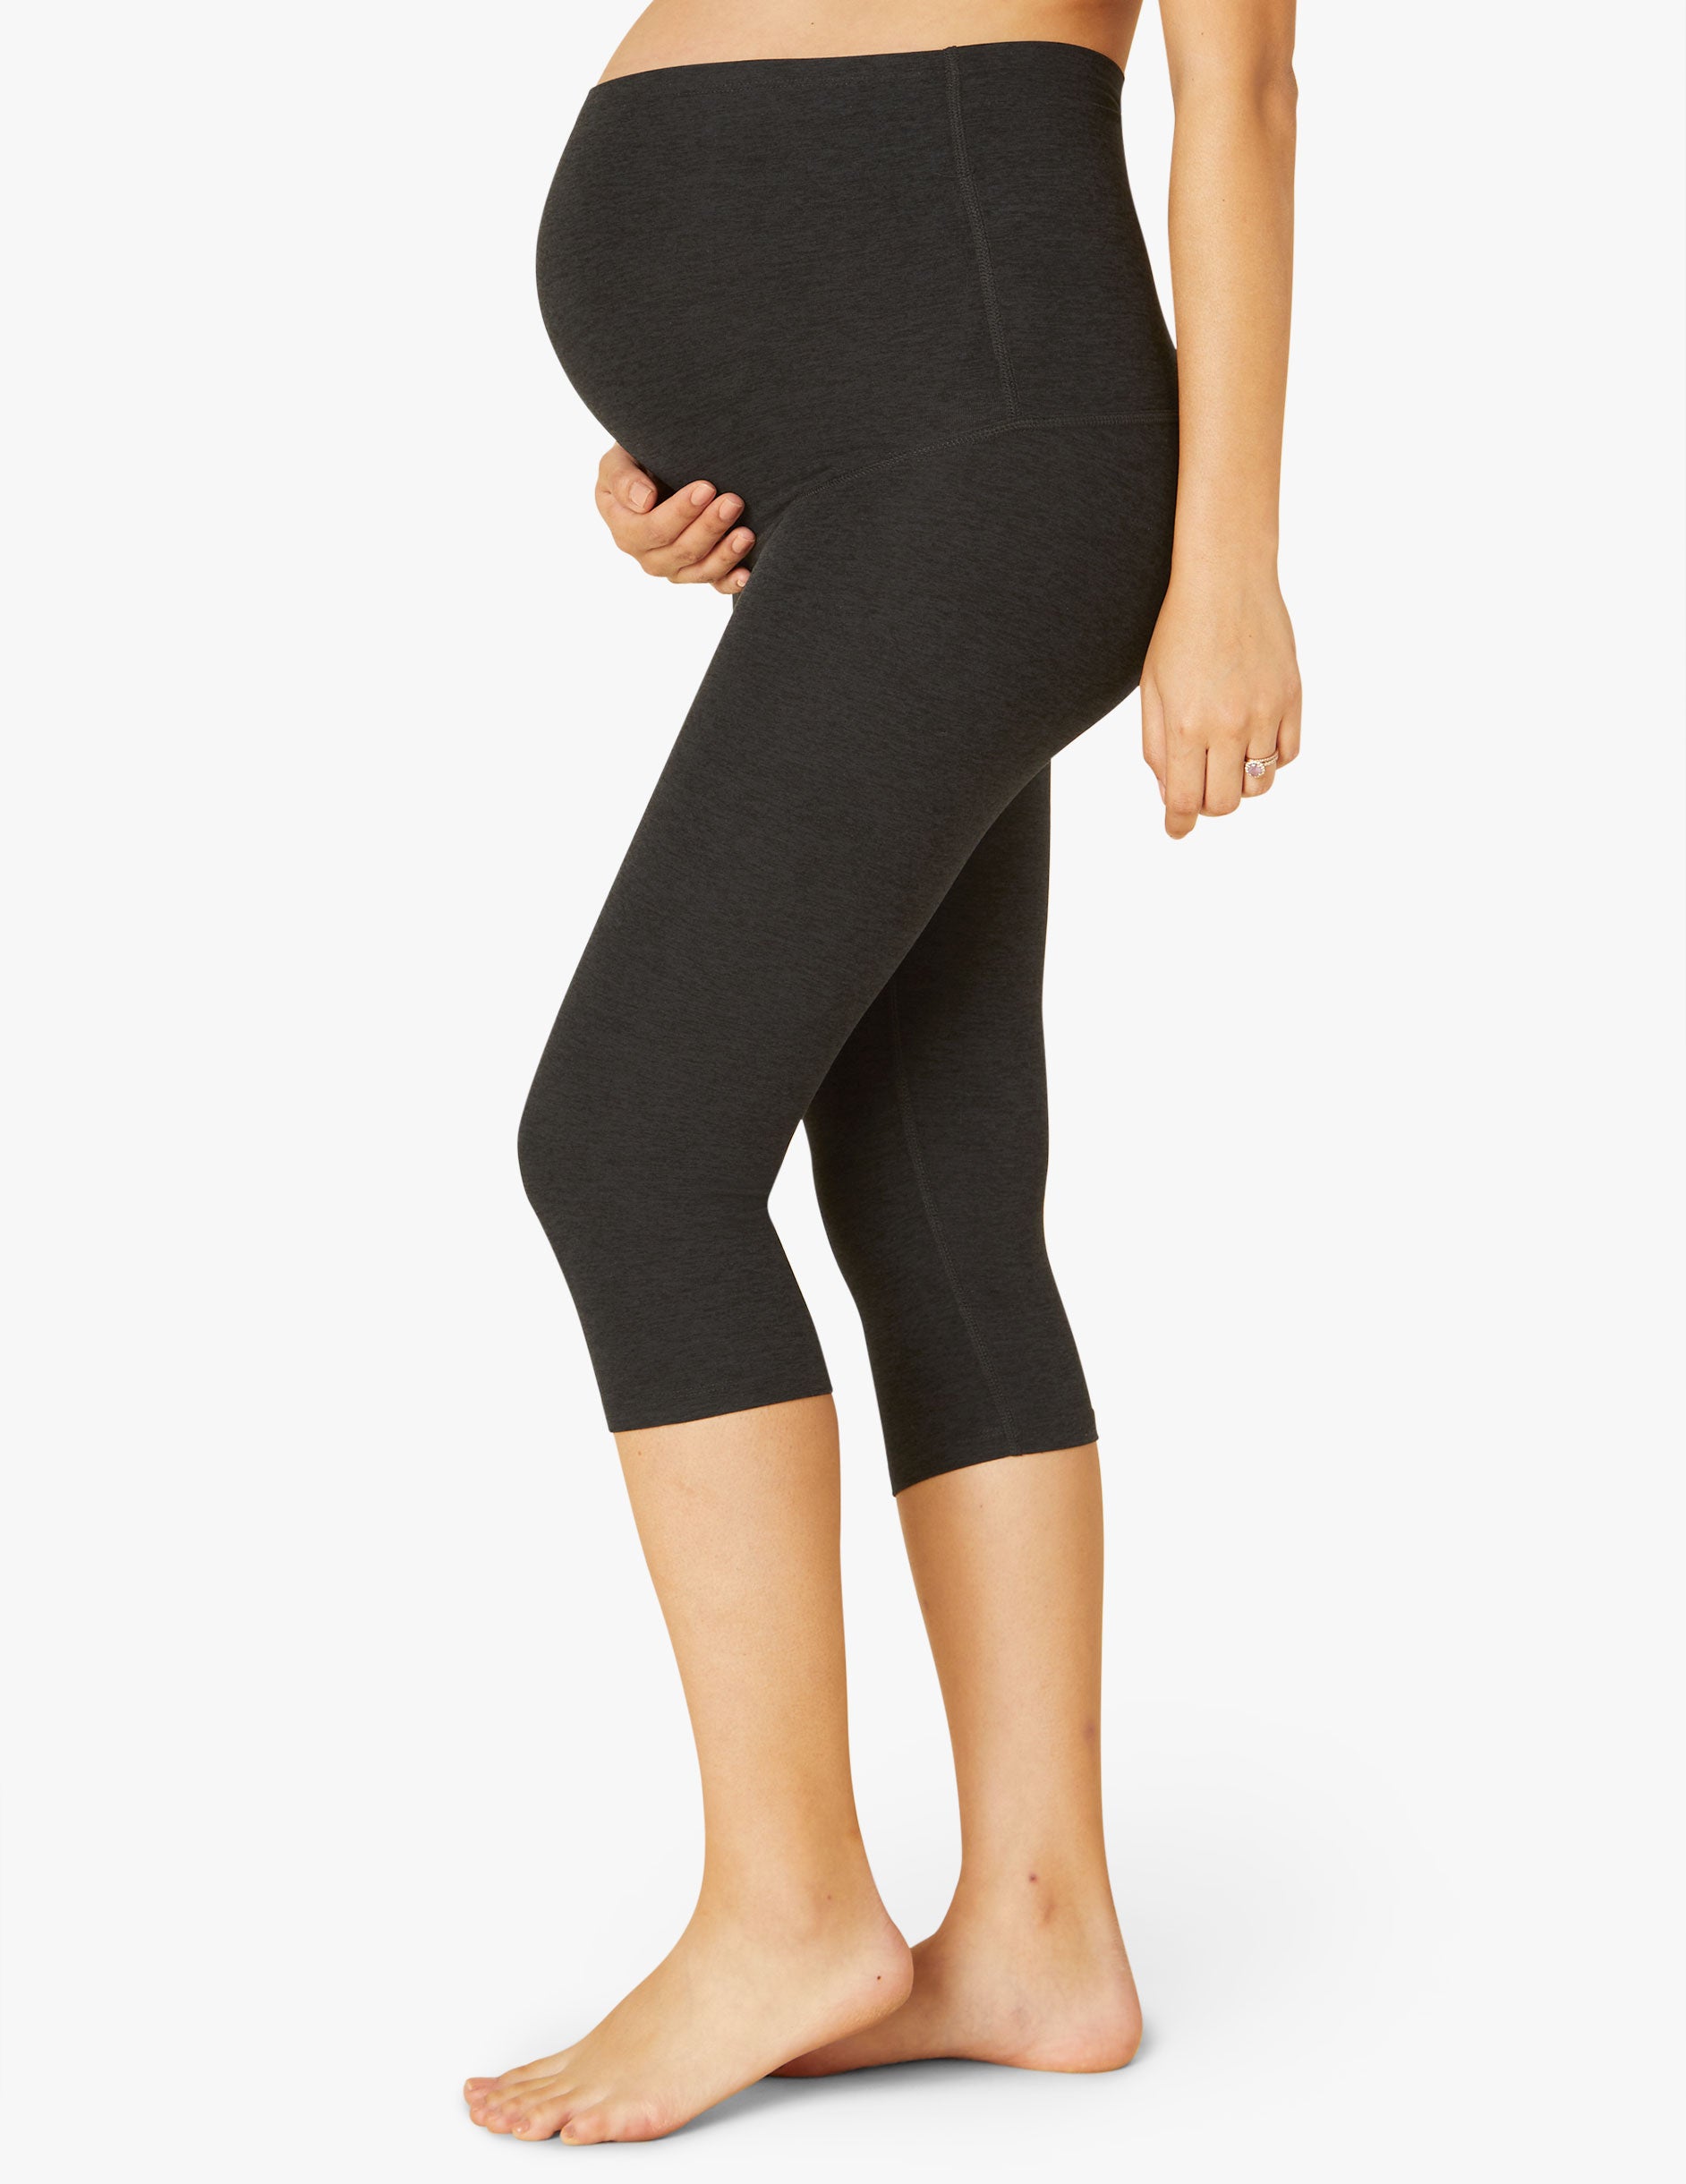 Spacedye Glow and Grow Maternity Pedal Pusher Legging Image 3